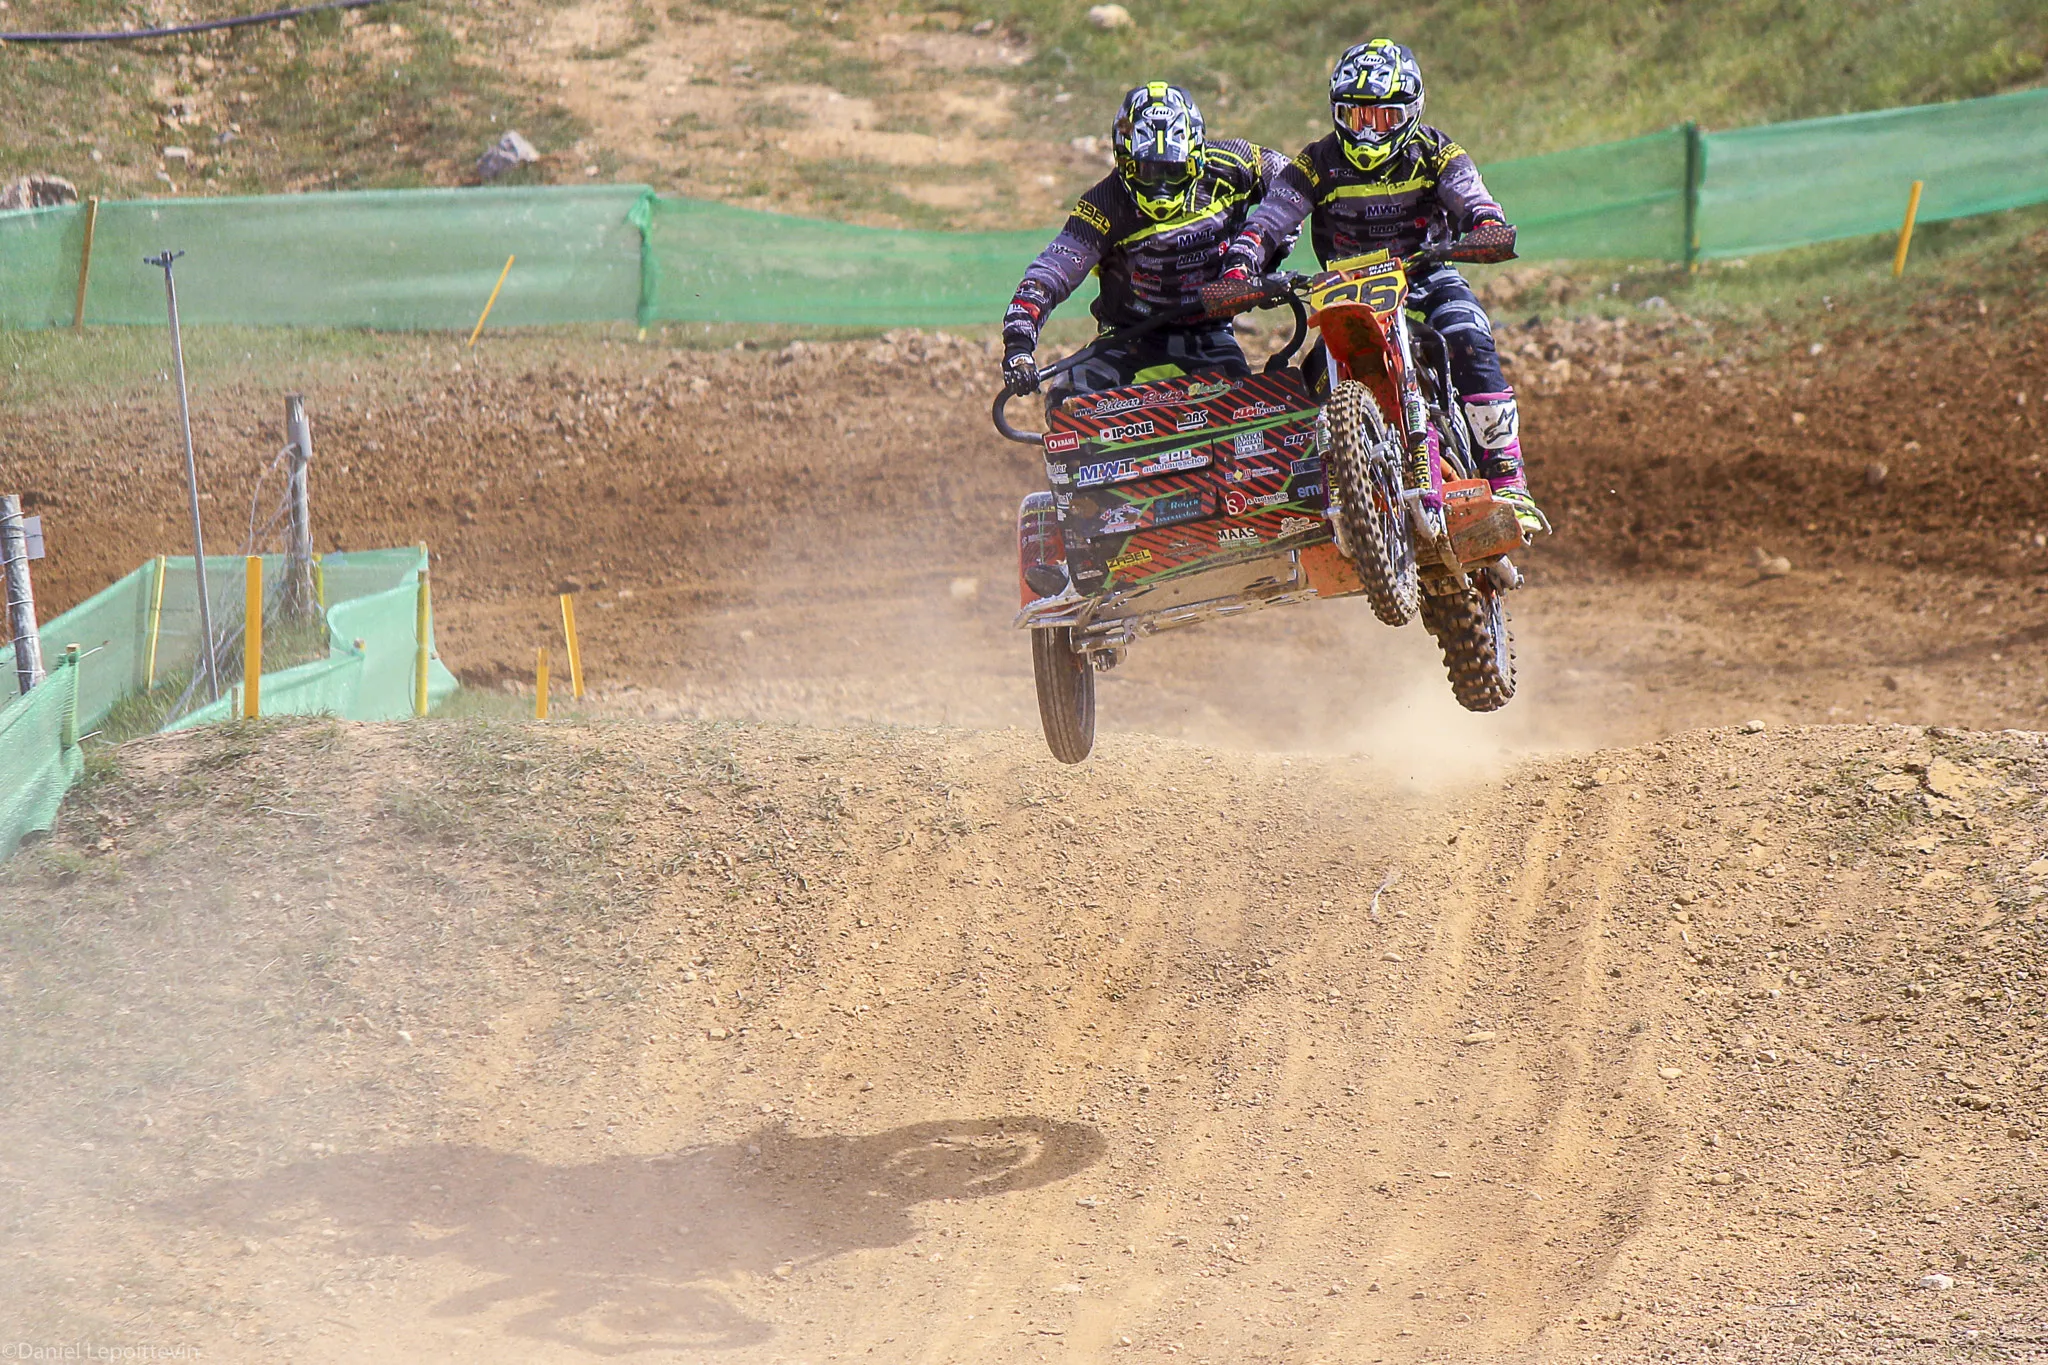 Photo showing: 500px provided description: 2018 Side Car Cross World Championship on the motocross circuit of Castelnau de L?vis, in the Tarn, in Occitania, in the South West of France [#cross ,#france ,#race ,#world ,#track ,#motocross ,#qualifying ,#championship ,#world championship ,#sidecars ,#qualification ,#side-car ,#worldchampionship ,#qualifier ,#motocross track ,#sidecar cross ,#world championship sidecar cross ,#24mxtoumotocross ,#world championship sidecar ,#world championship side-car cross ,#qualiyingrace ,#2018 sidecar ,#Castelnau de L?vis]